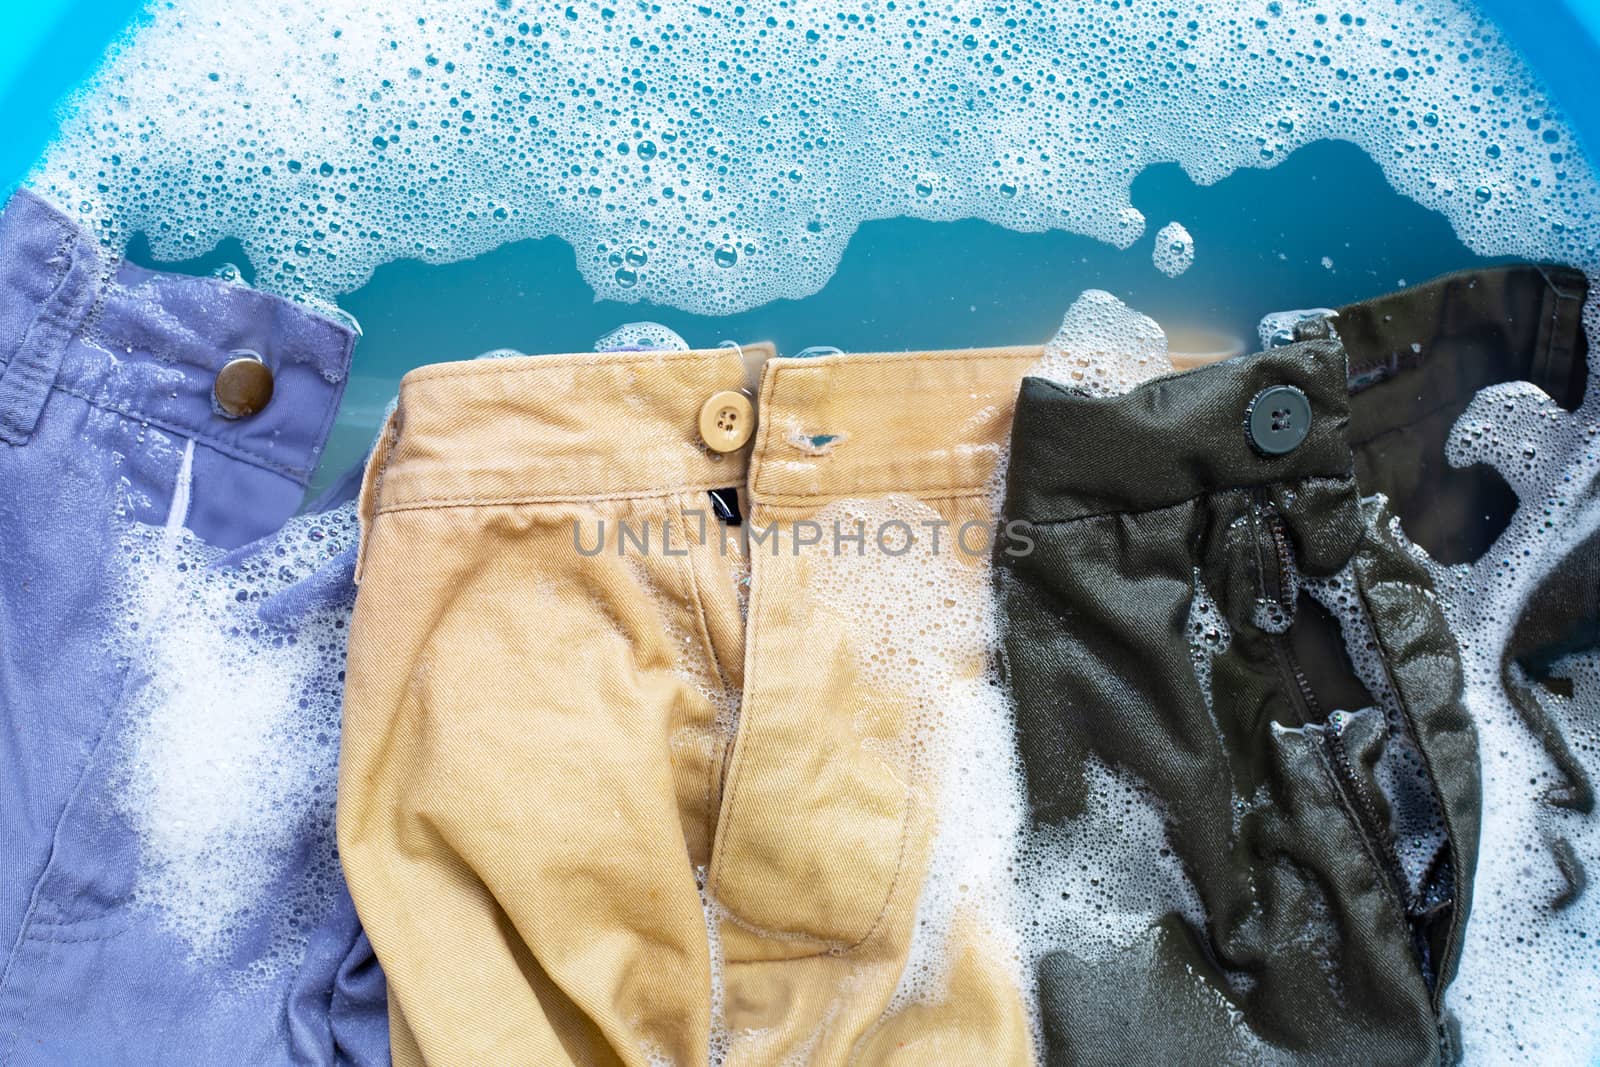 Trousers soak in powder detergent water dissolution. Laundry con by Bowonpat